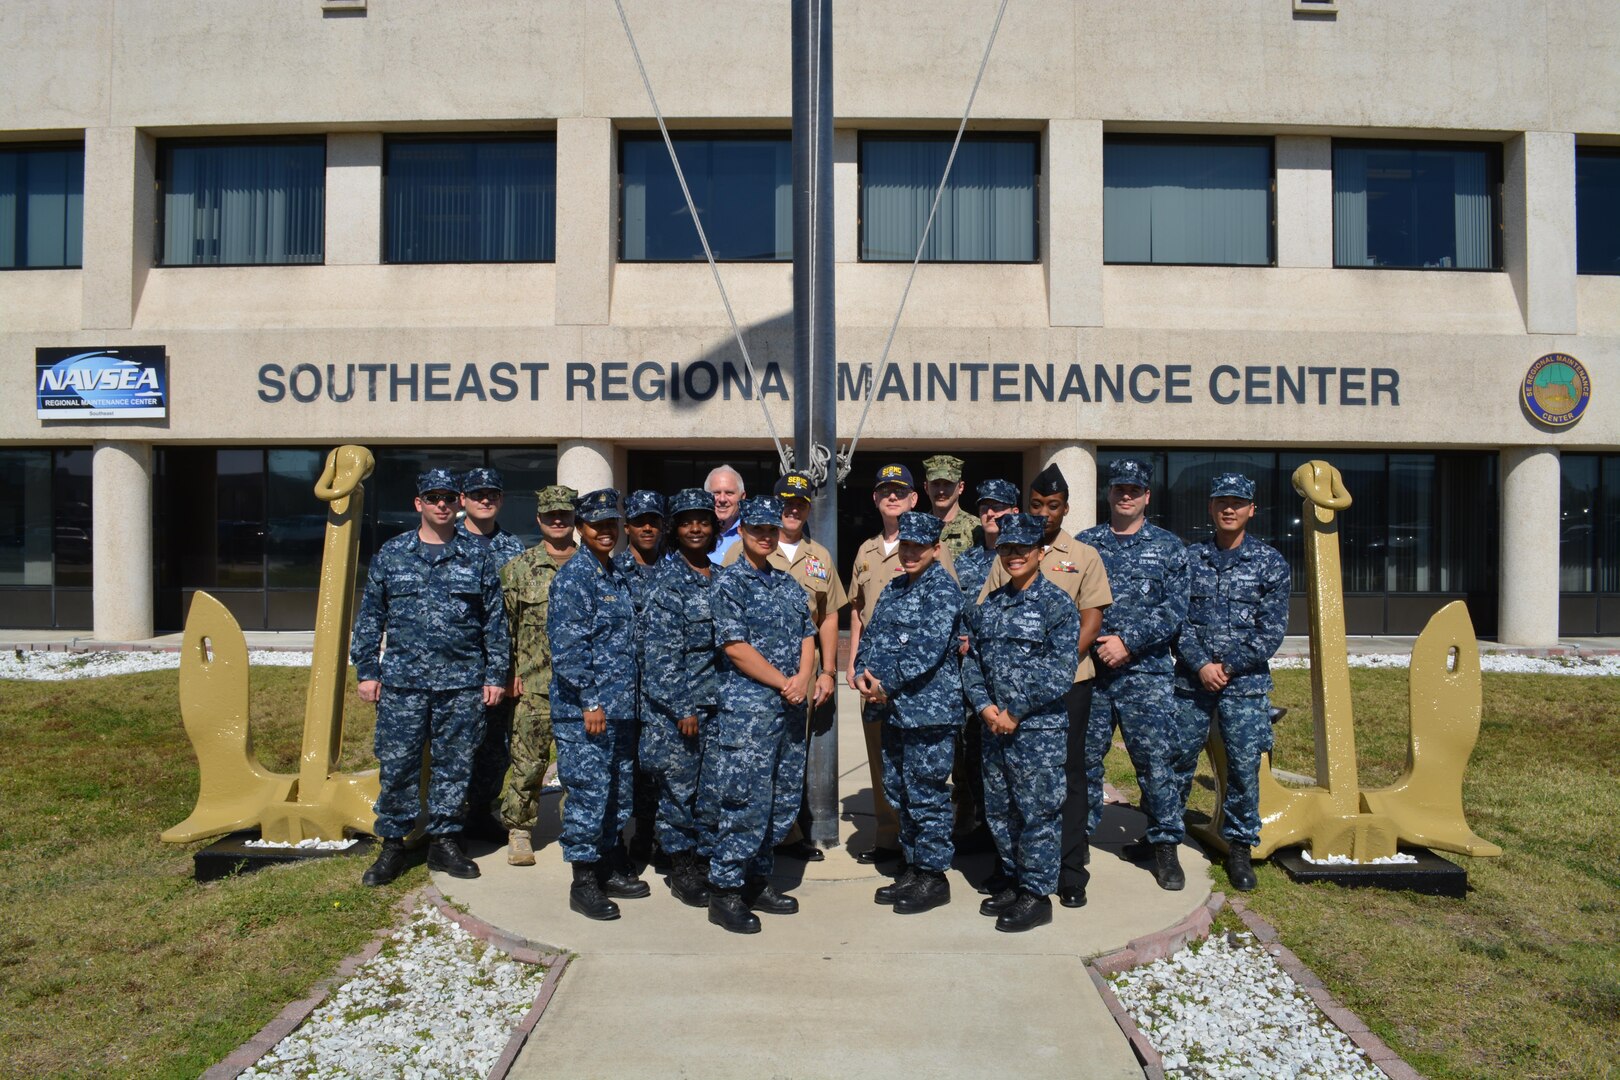 Capt. Dave Gombas, Commanding Officer (back row, center right); Capt. Gary Martin (back row, center left), Executive Officer and Bob Wright (back row, center left), Executive Director at Southeast Regional Maintenance Center (SERMC) are surrounded by Navy Counselor Chief Shanika Jones (4th from left) and a few of the SERMC Sailors who reenlisted during Fiscal Year 2016. SERMC was recognized for successful Sailor programs that form the foundation of a successful retention effort, earning the coveted “Golden Anchors” award.